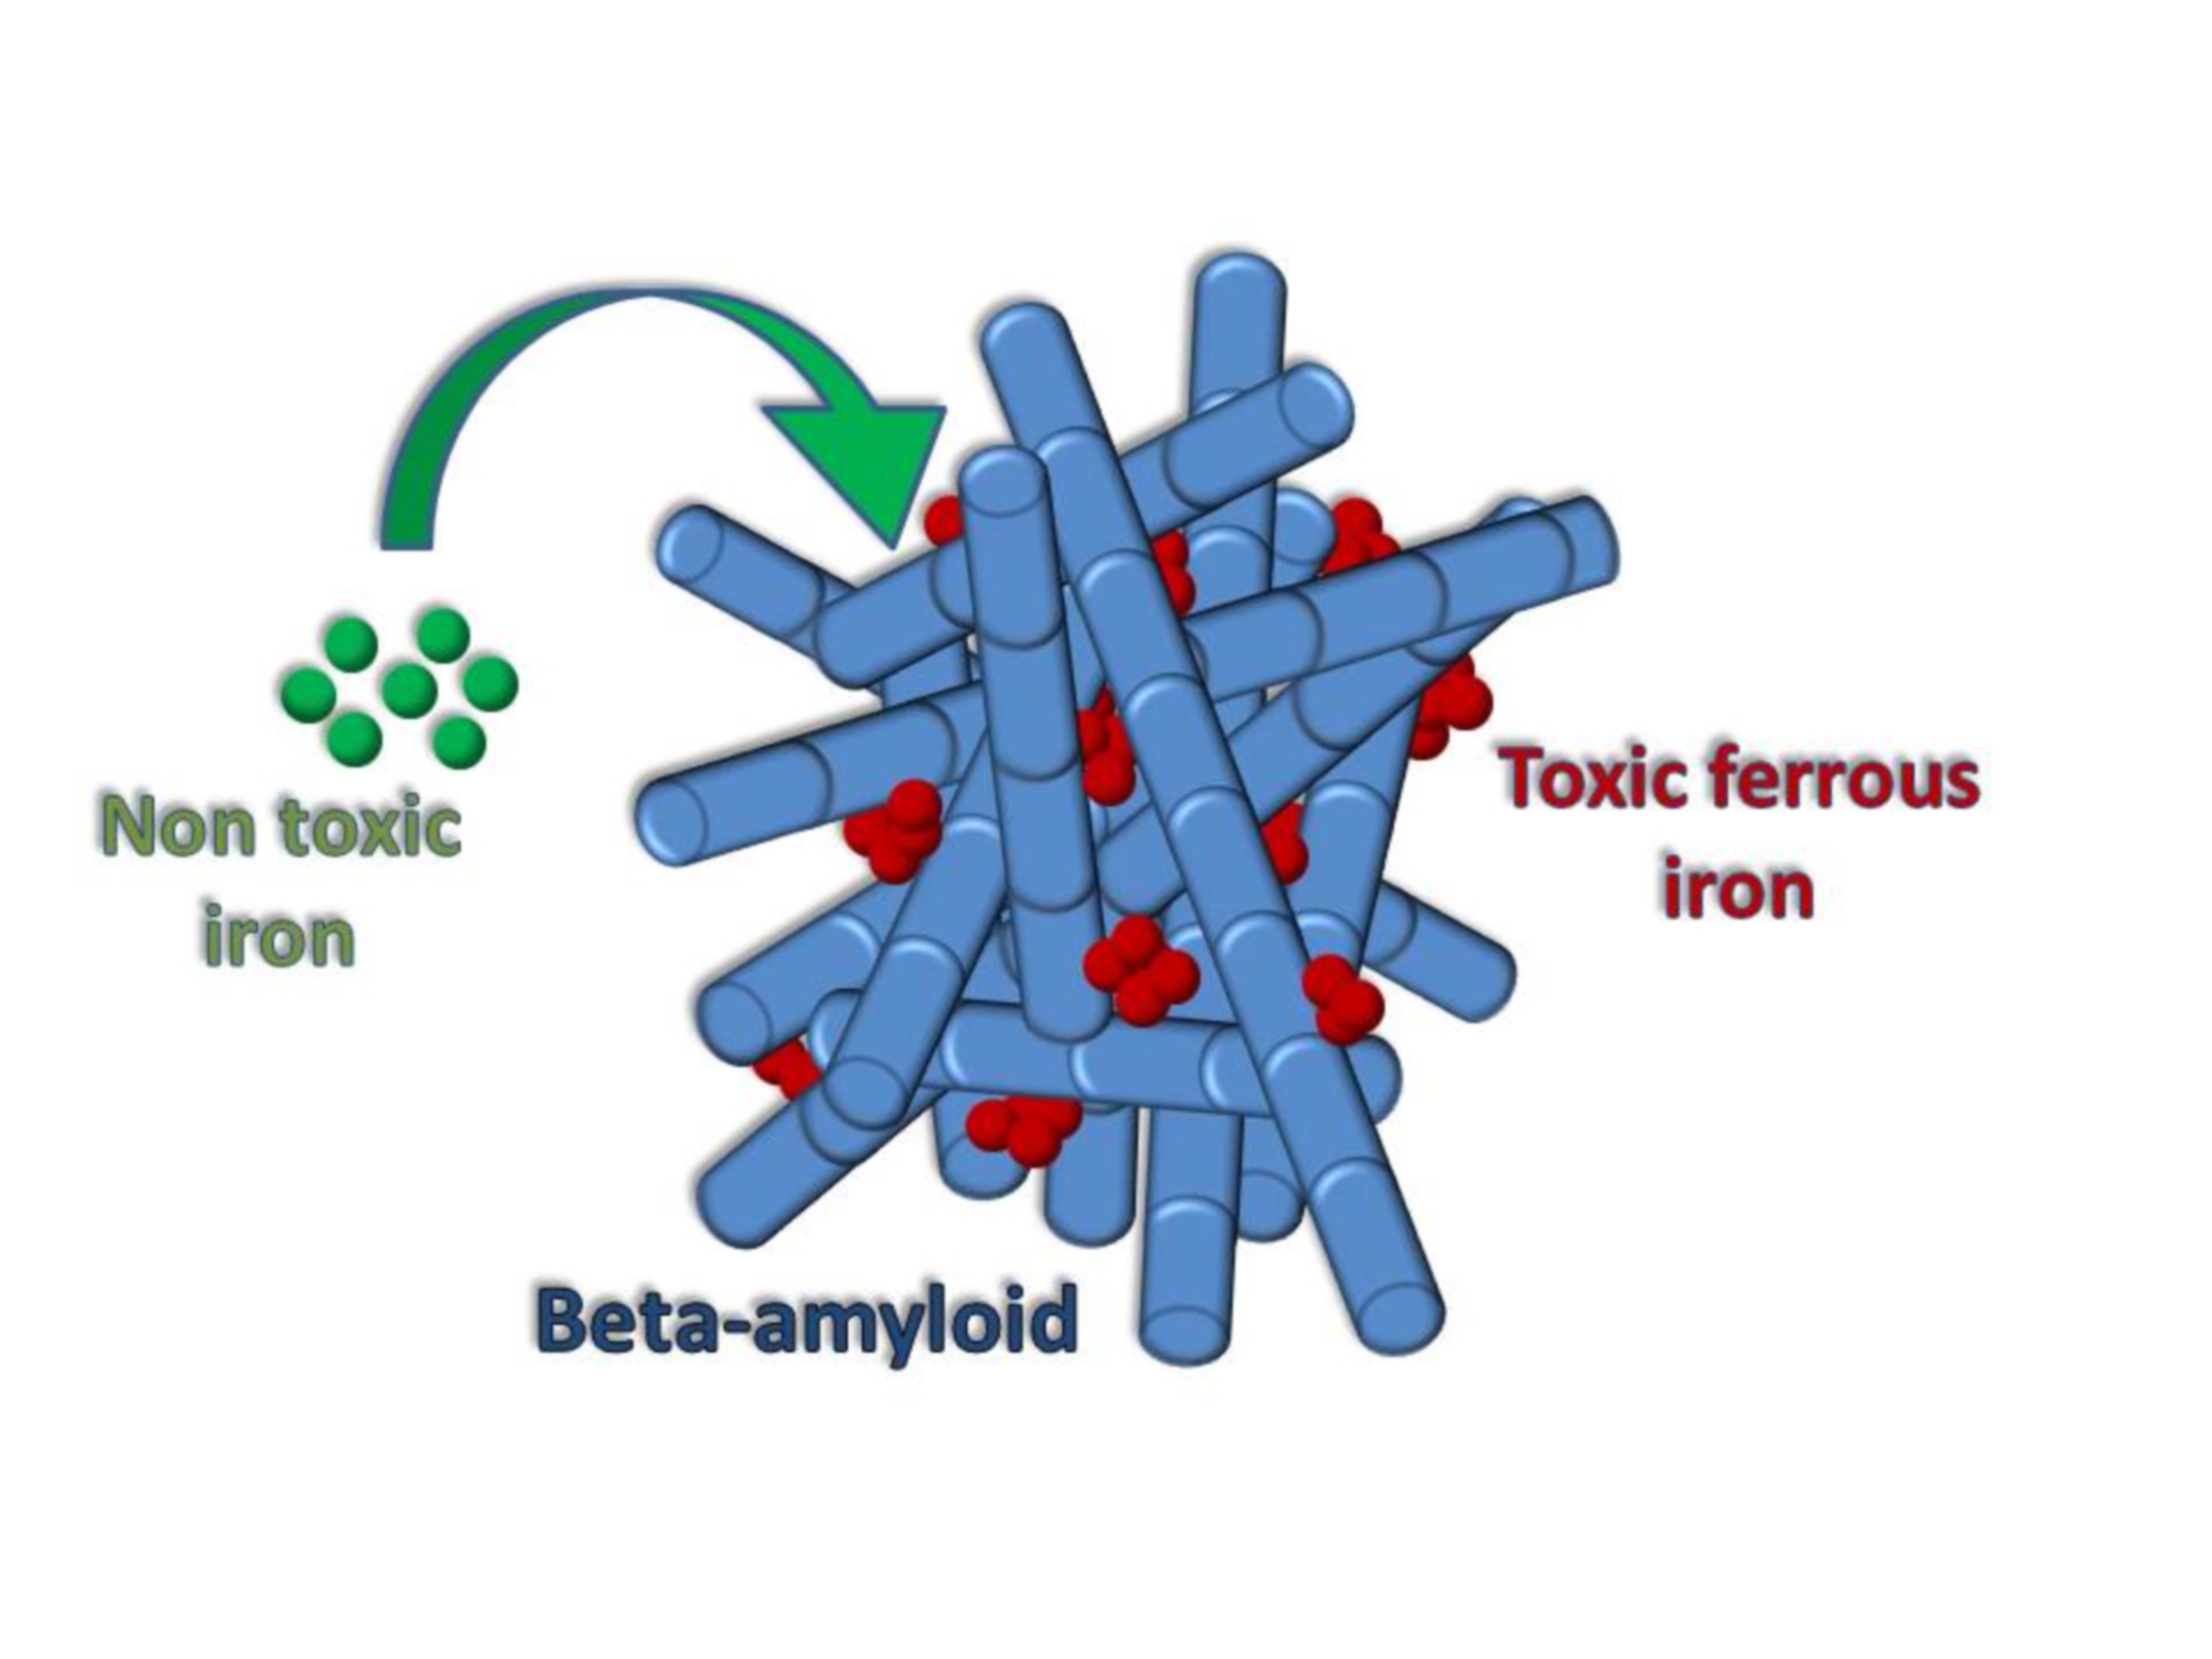 Beta-amyloid induced toxic iron formation